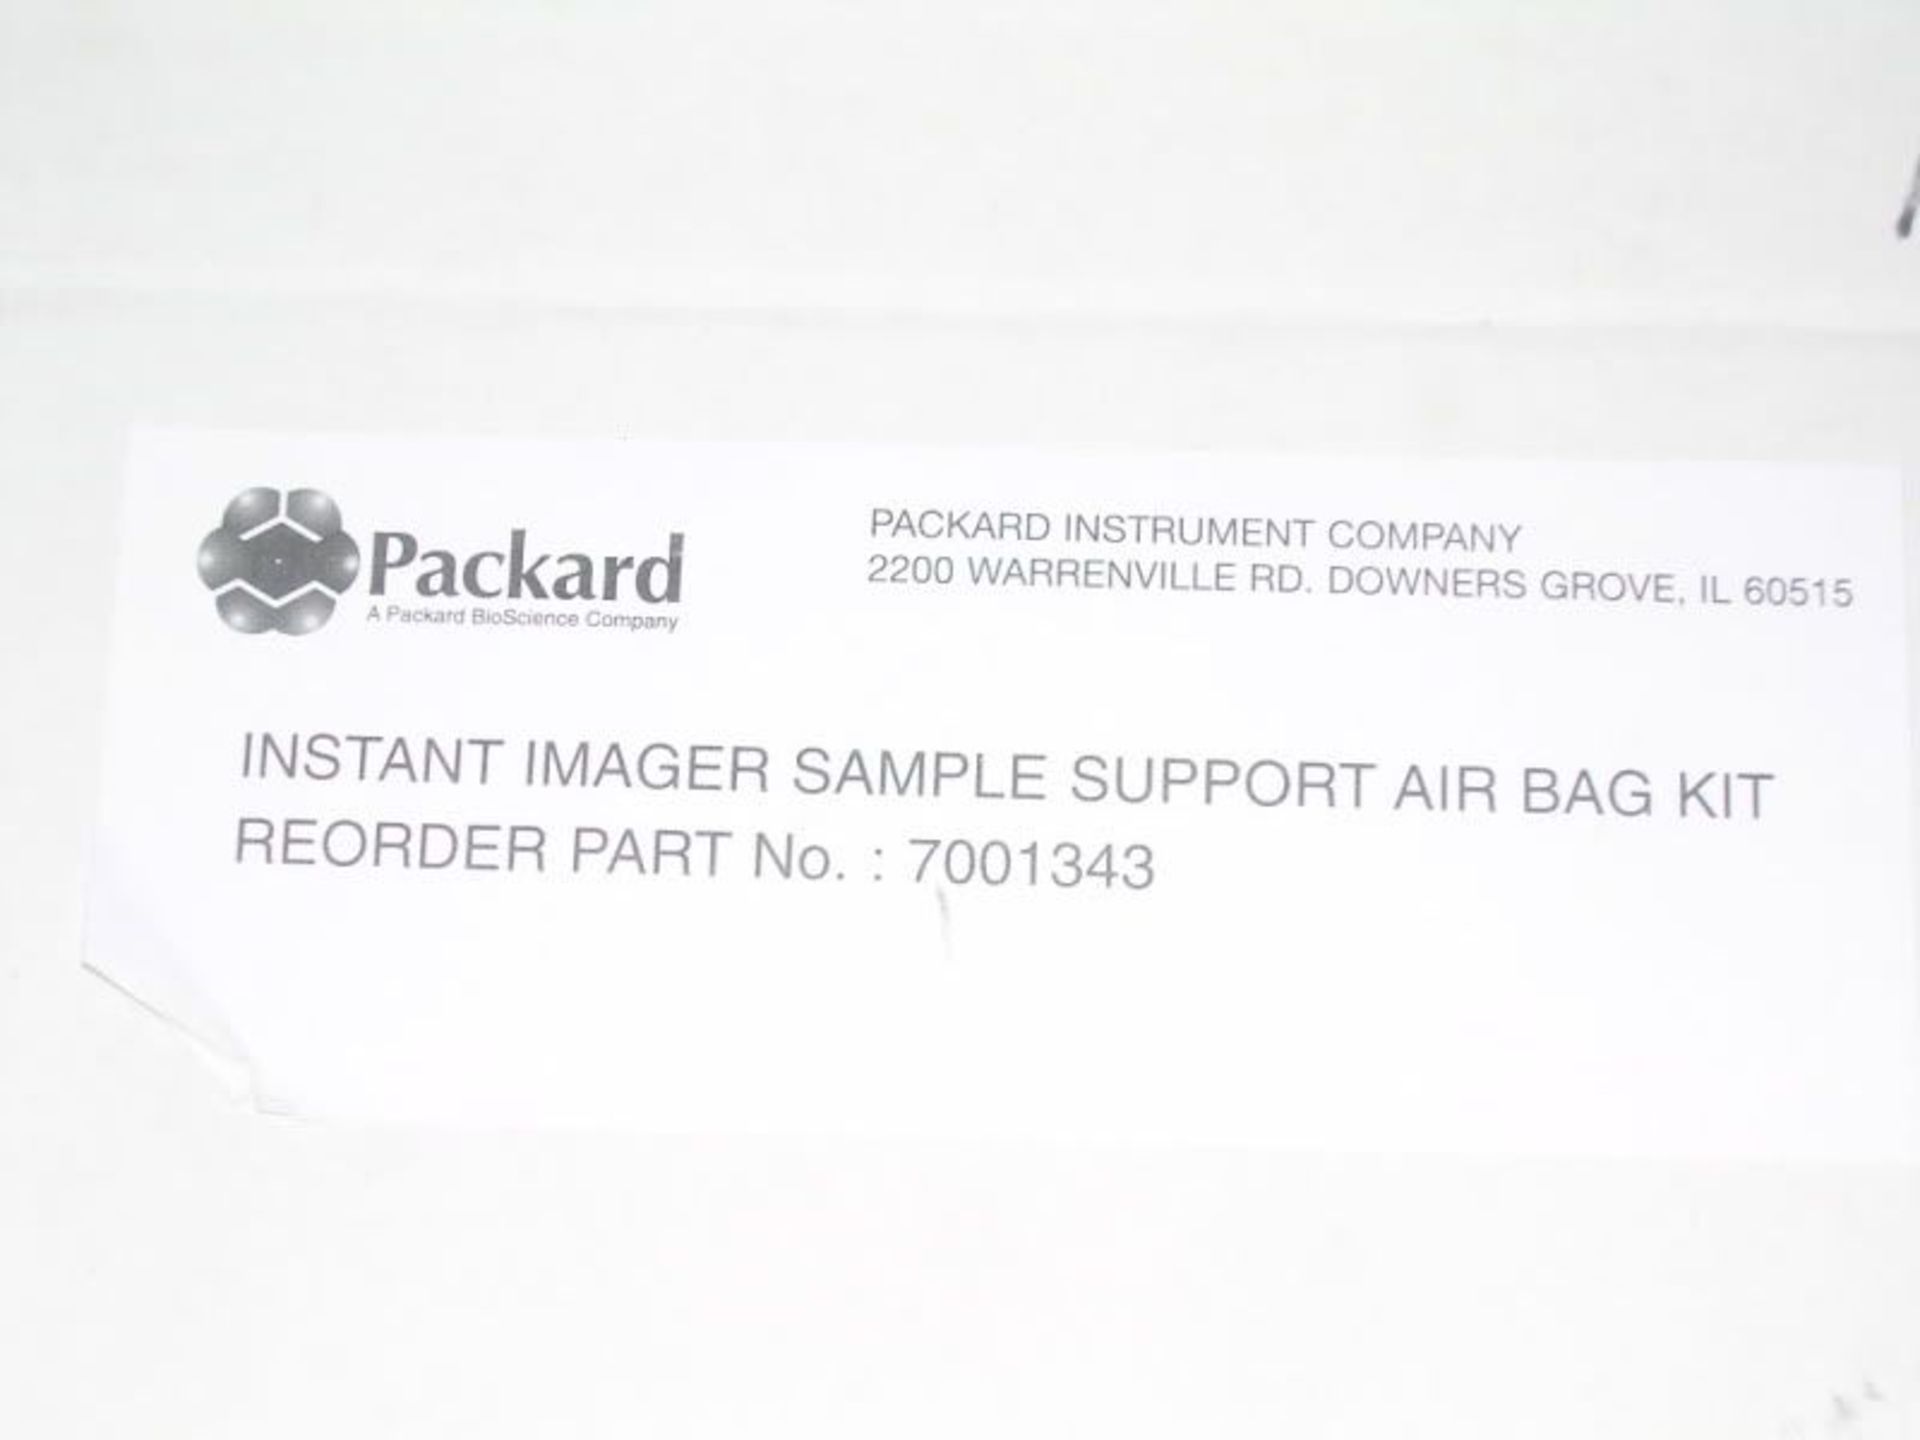 Packard InstantImager Sample Support Air Bag 7001343, Qty 1, 220585288063 - Image 2 of 7